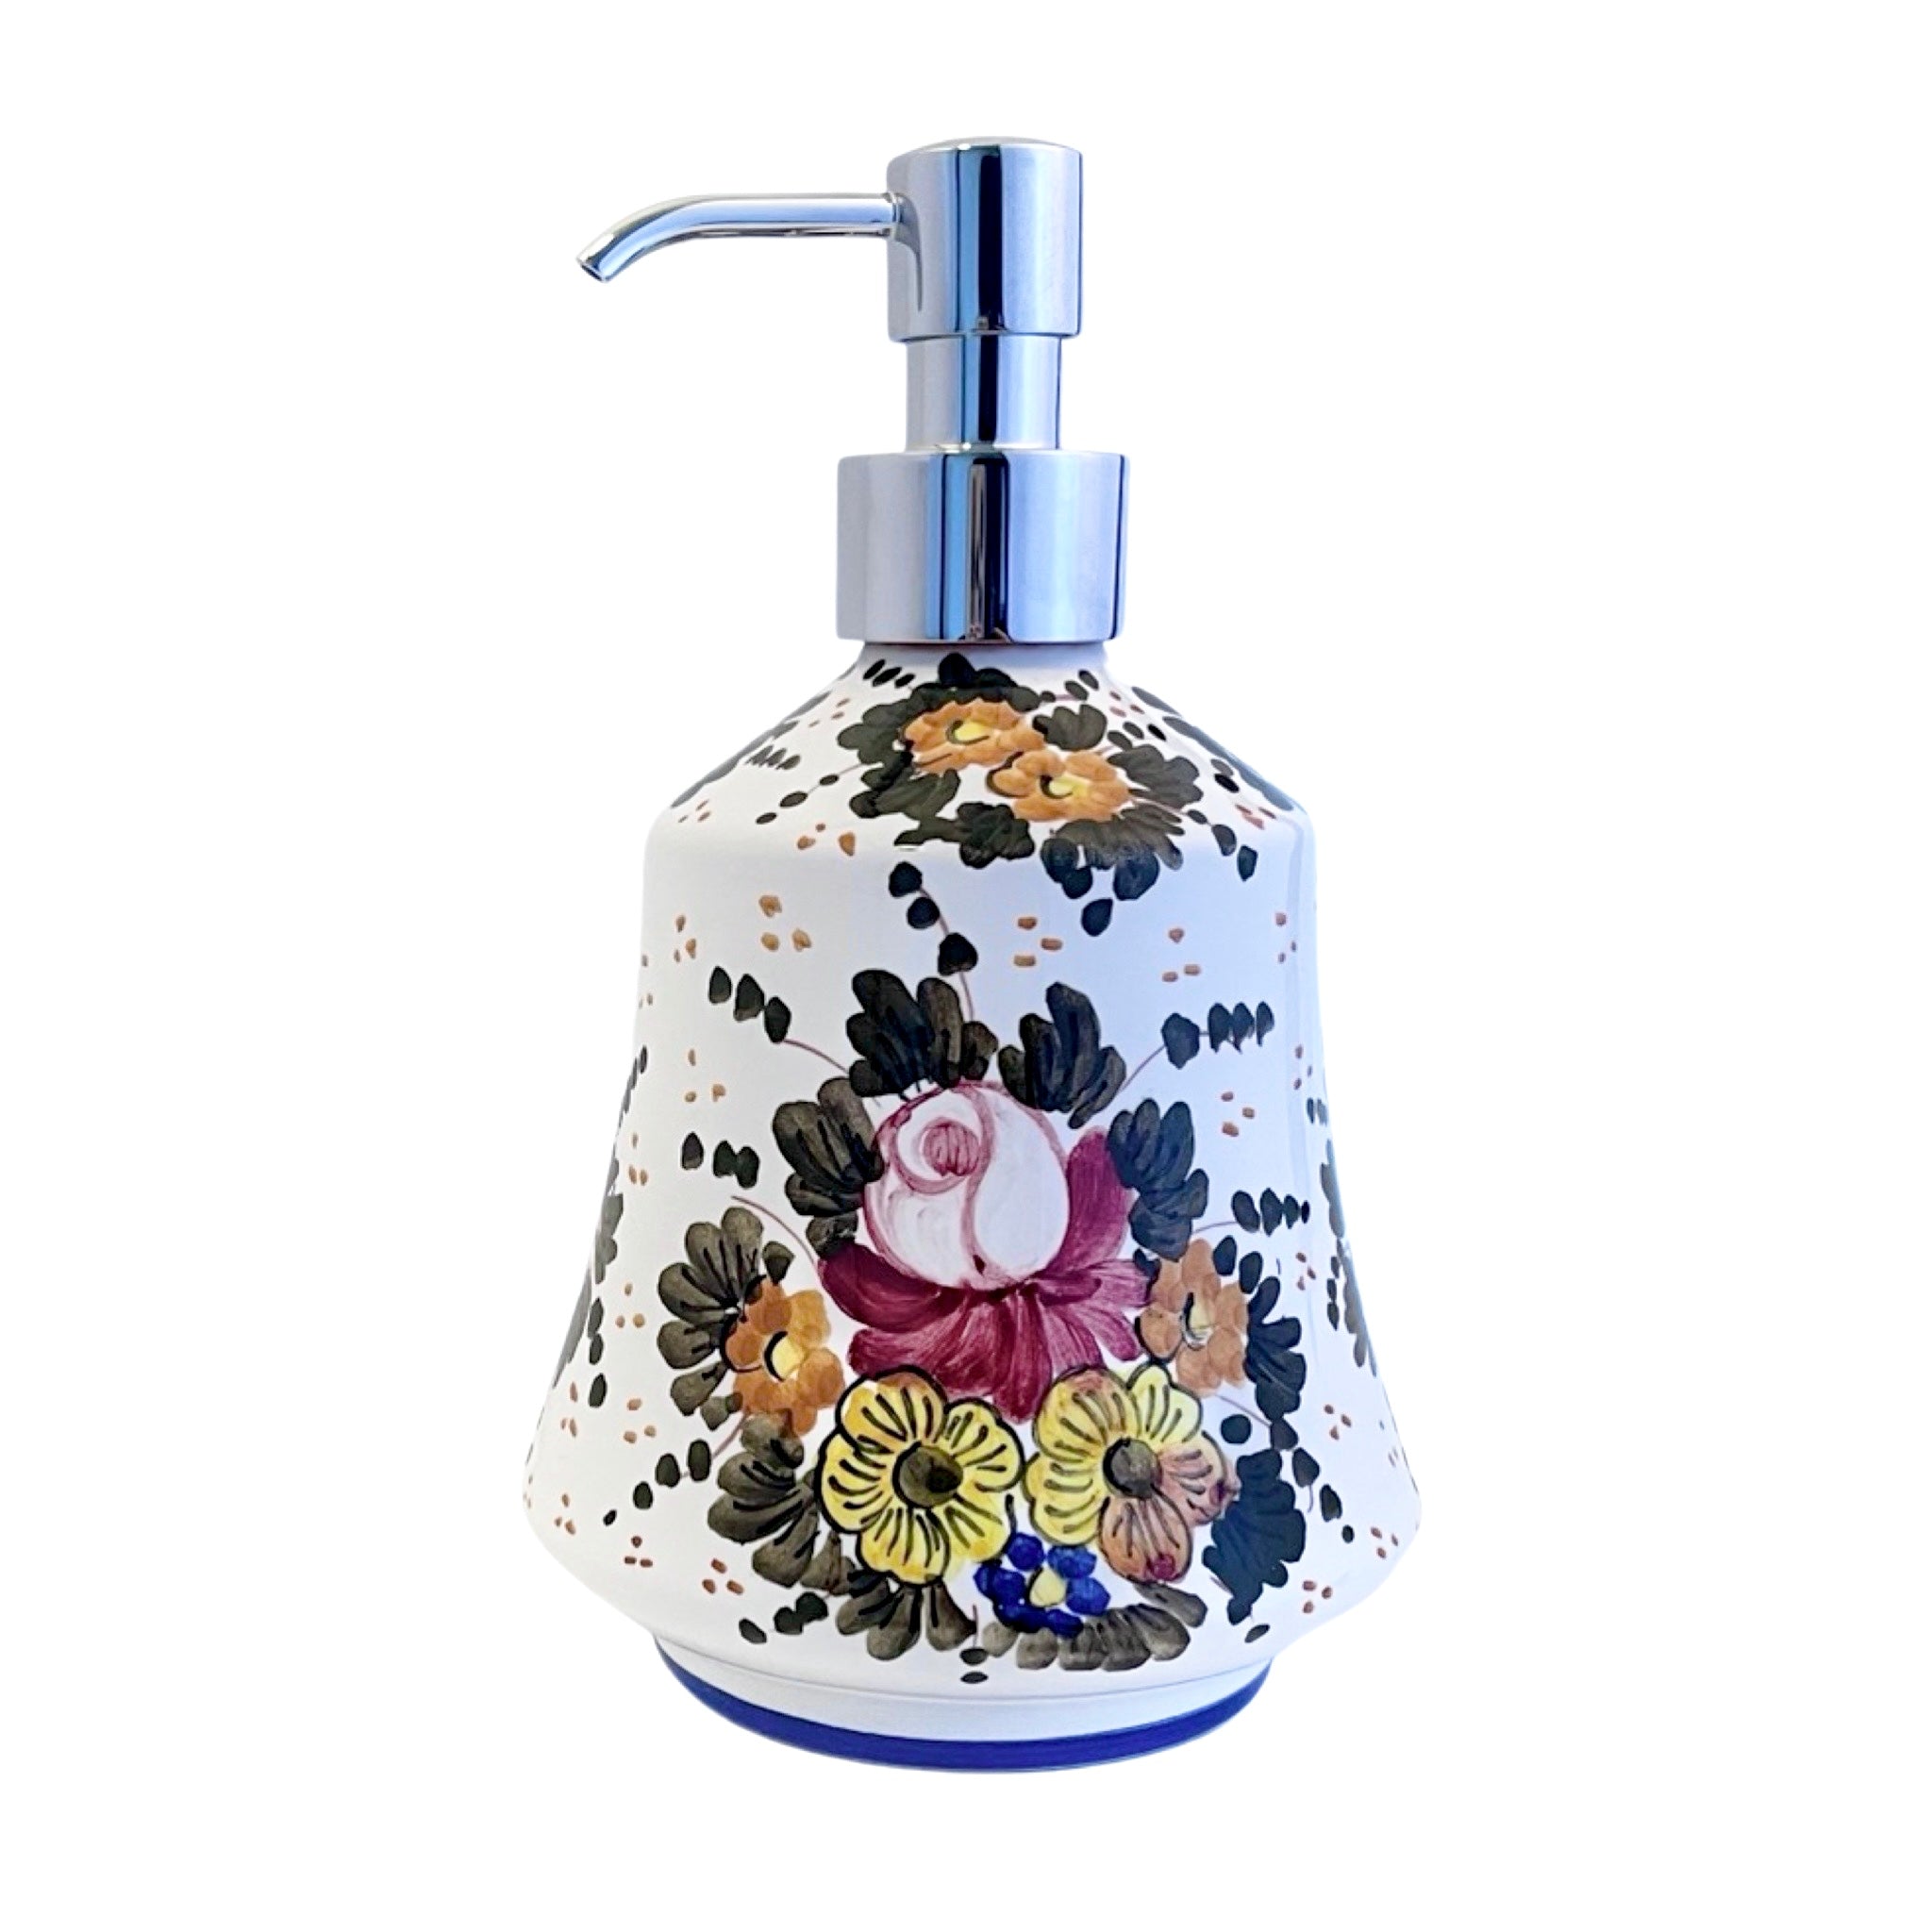 Rosa - Soap Dispenser, ceramics, pottery, italian design, majolica, handmade, handcrafted, handpainted, home decor, kitchen art, home goods, deruta, majolica, Artisan, treasures, traditional art, modern art, gift ideas, style, SF, shop small business, artists, shop online, landmark store, legacy, one of a kind, limited edition, gift guide, gift shop, retail shop, decorations, shopping, italy, home staging, home decorating, home interiors